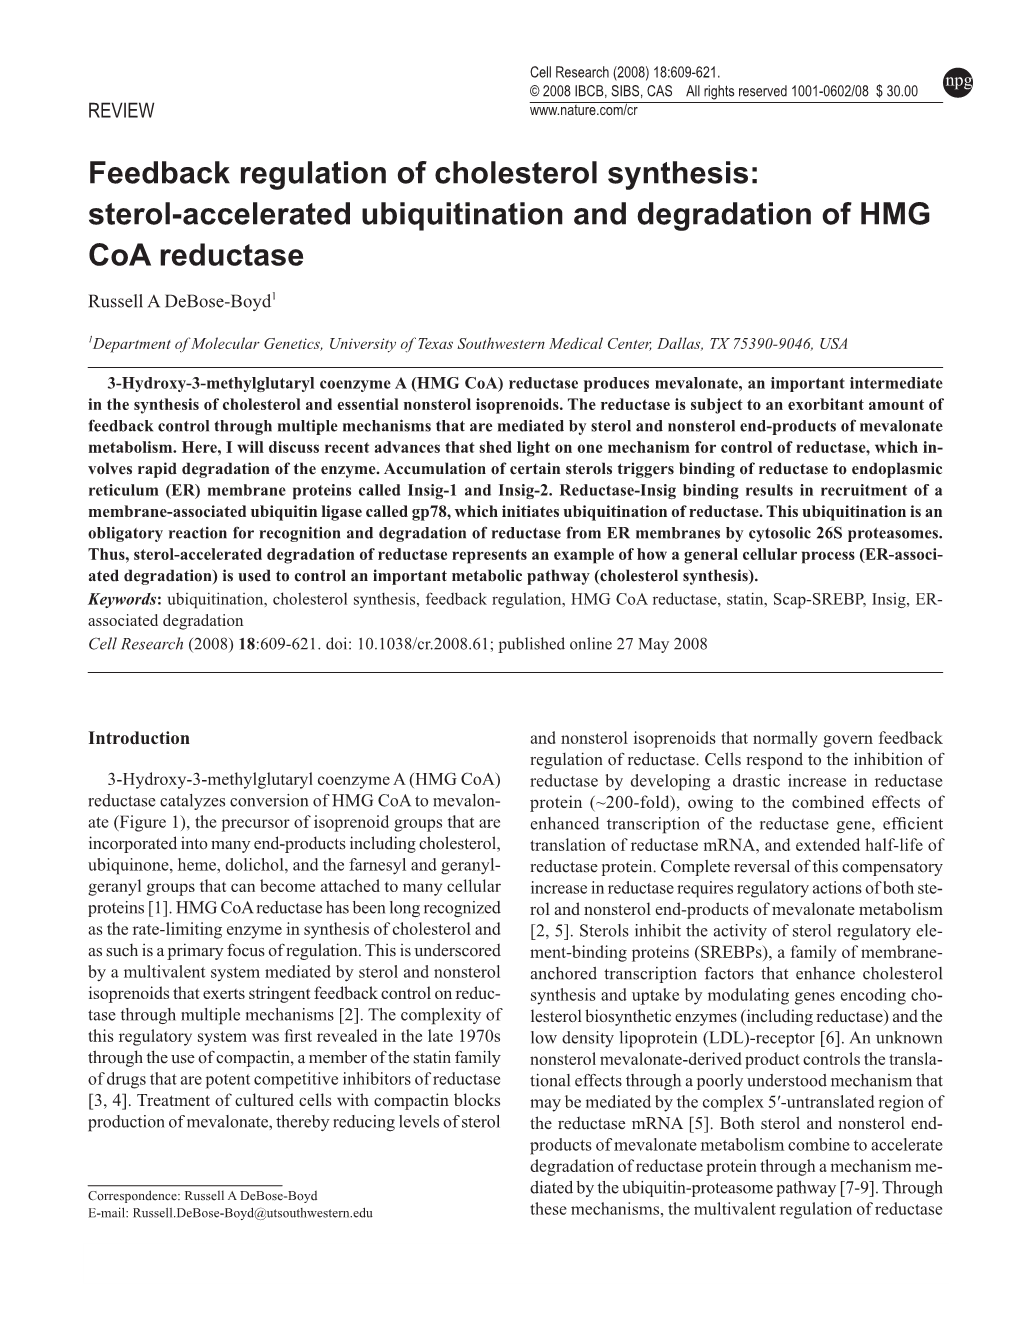 Sterol-Accelerated Ubiquitination and Degradation of HMG Coa Reductase Russell a Debose-Boyd1